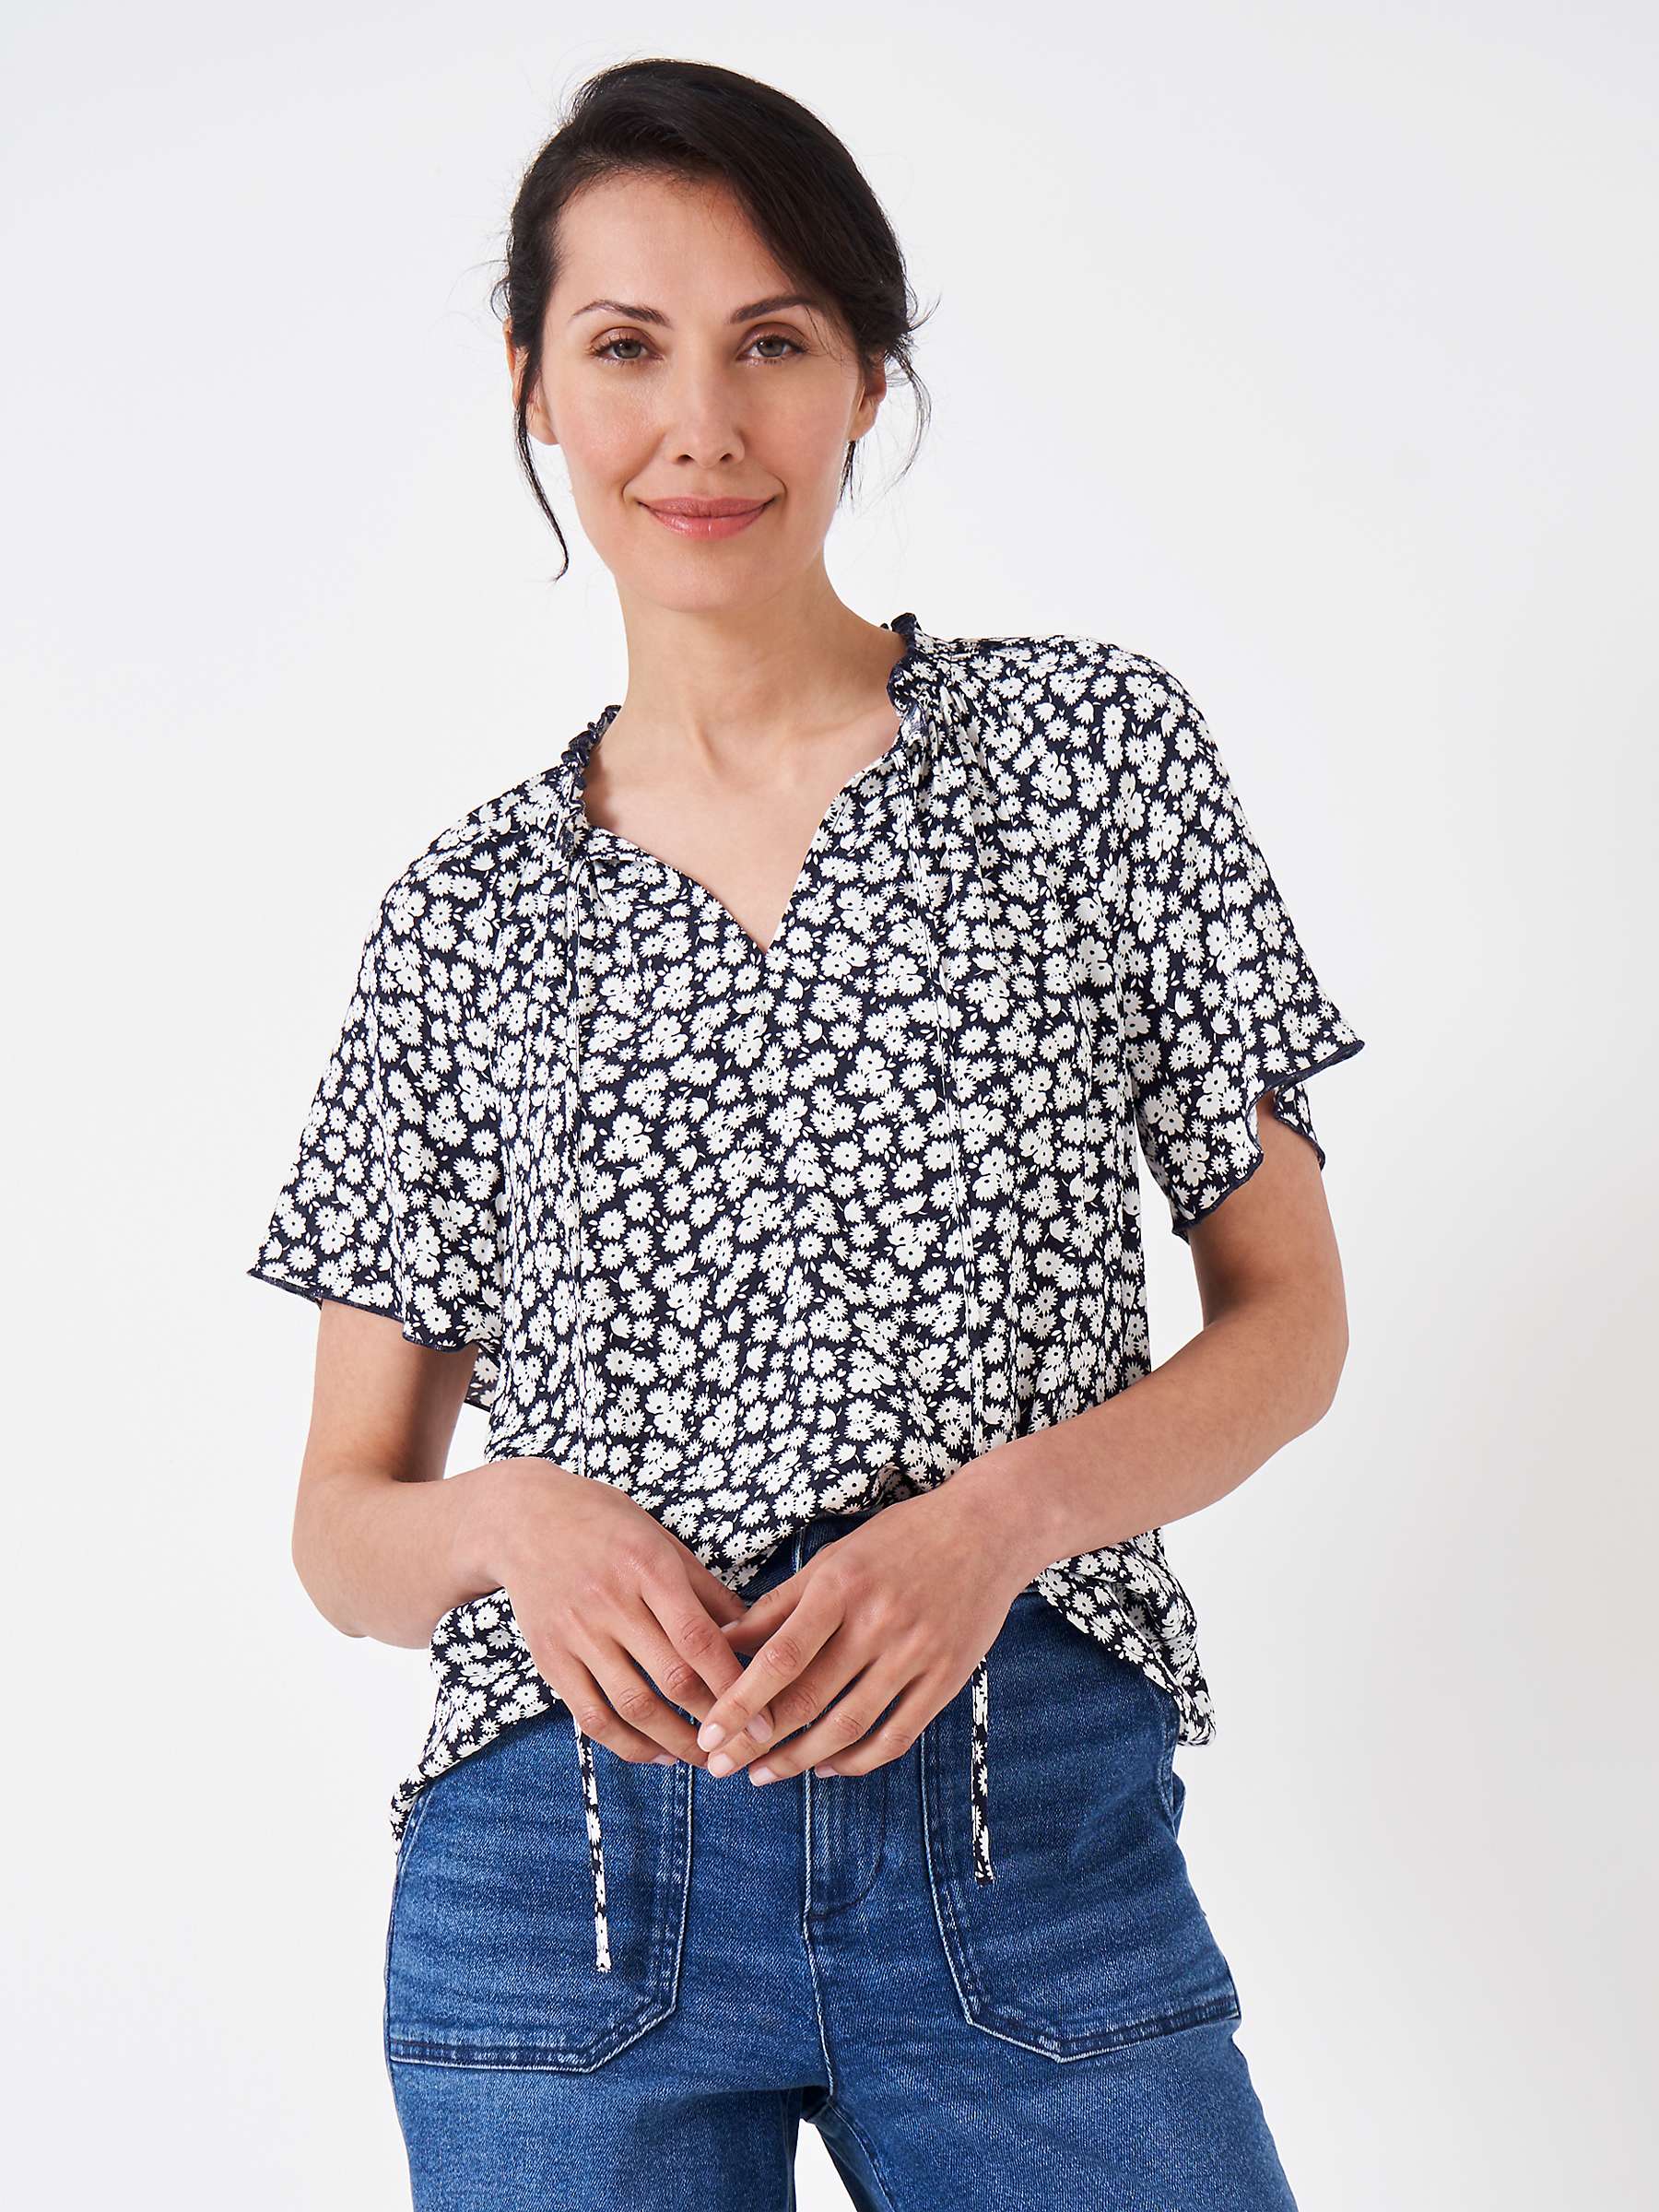 Buy Crew Clothing Ada Monochrome Floral Blouse, White/Multi Online at johnlewis.com